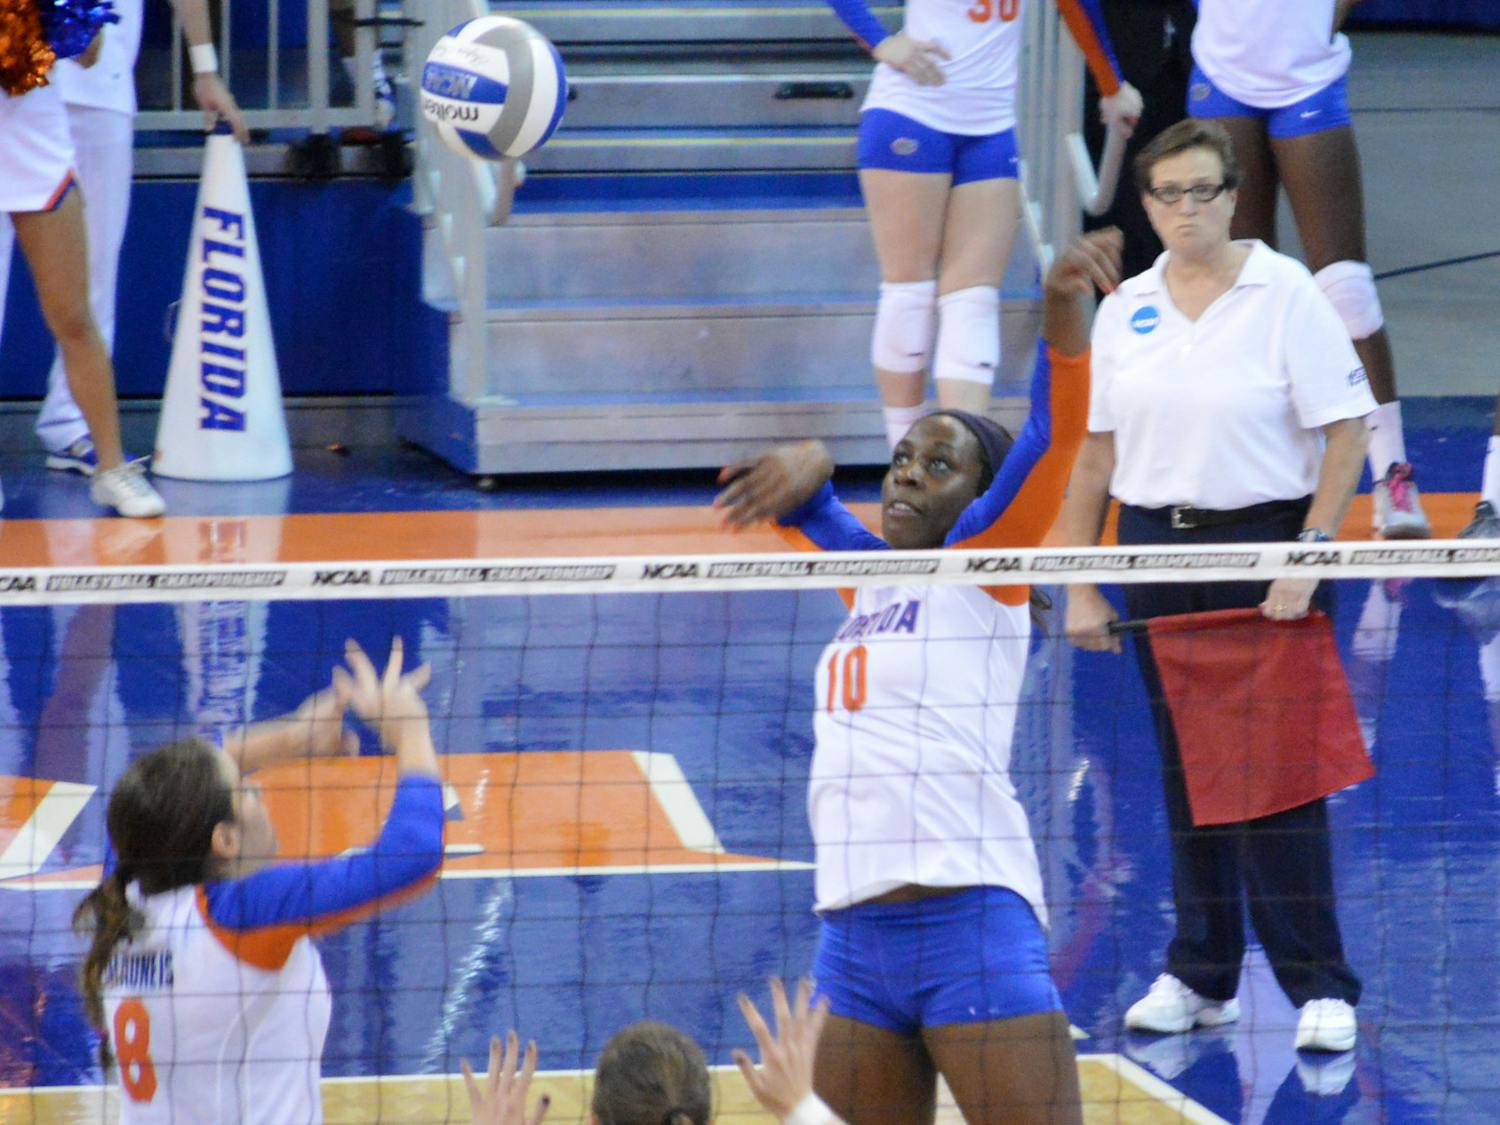 Redshirt senior middle blocker Chloe Mann swings at the ball set to her by senior setter Taylor Brauneis during Florida’s 3-0 victory against Jacksonville on Thursday in the O’Connell Center. Mann had a team-high 15 kills against the Dolphins.